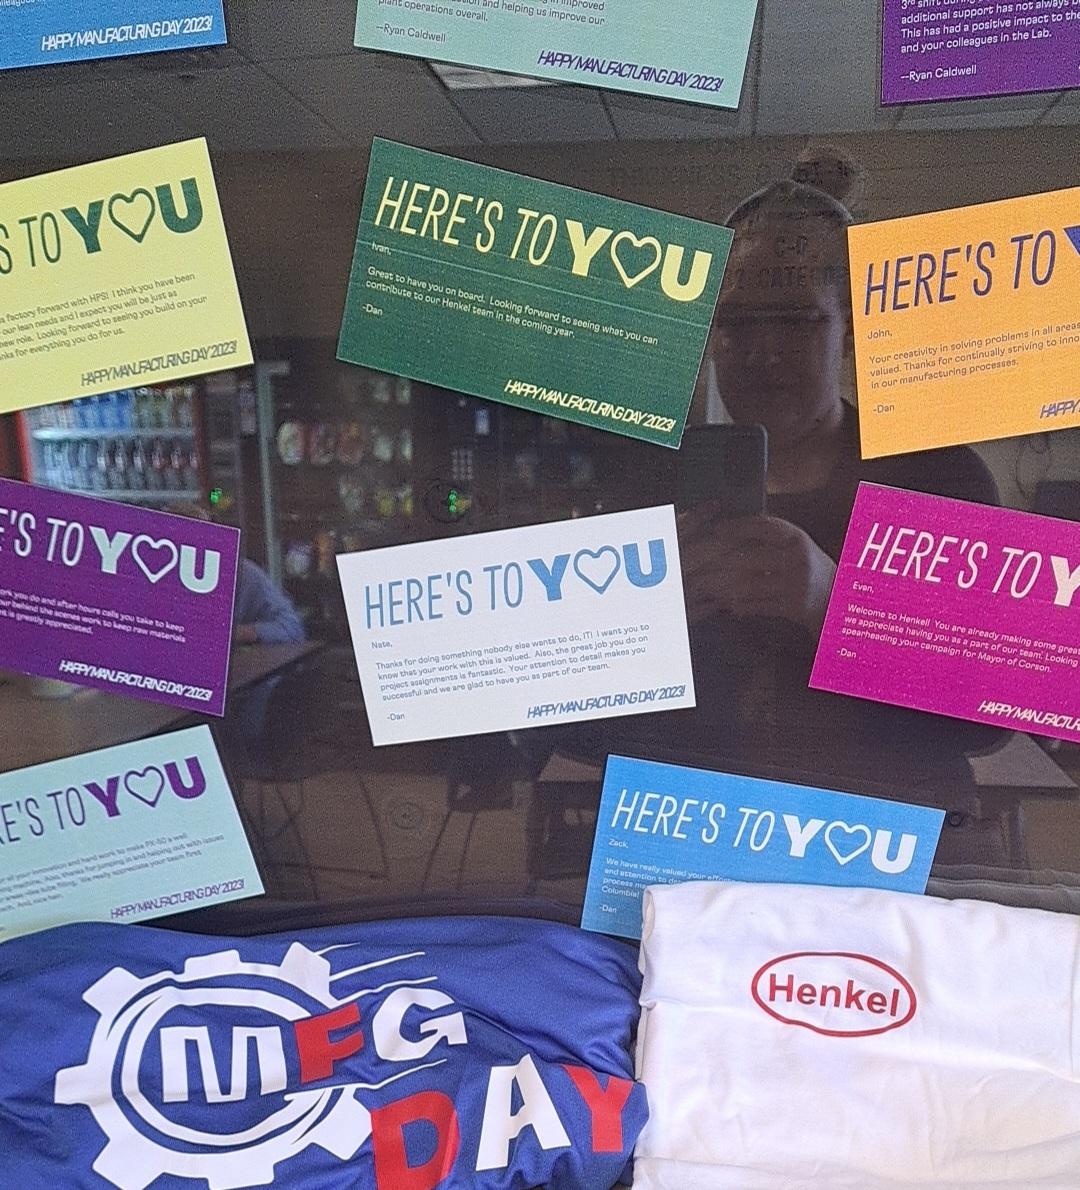 Colorful "Here's to you" signs on a window.